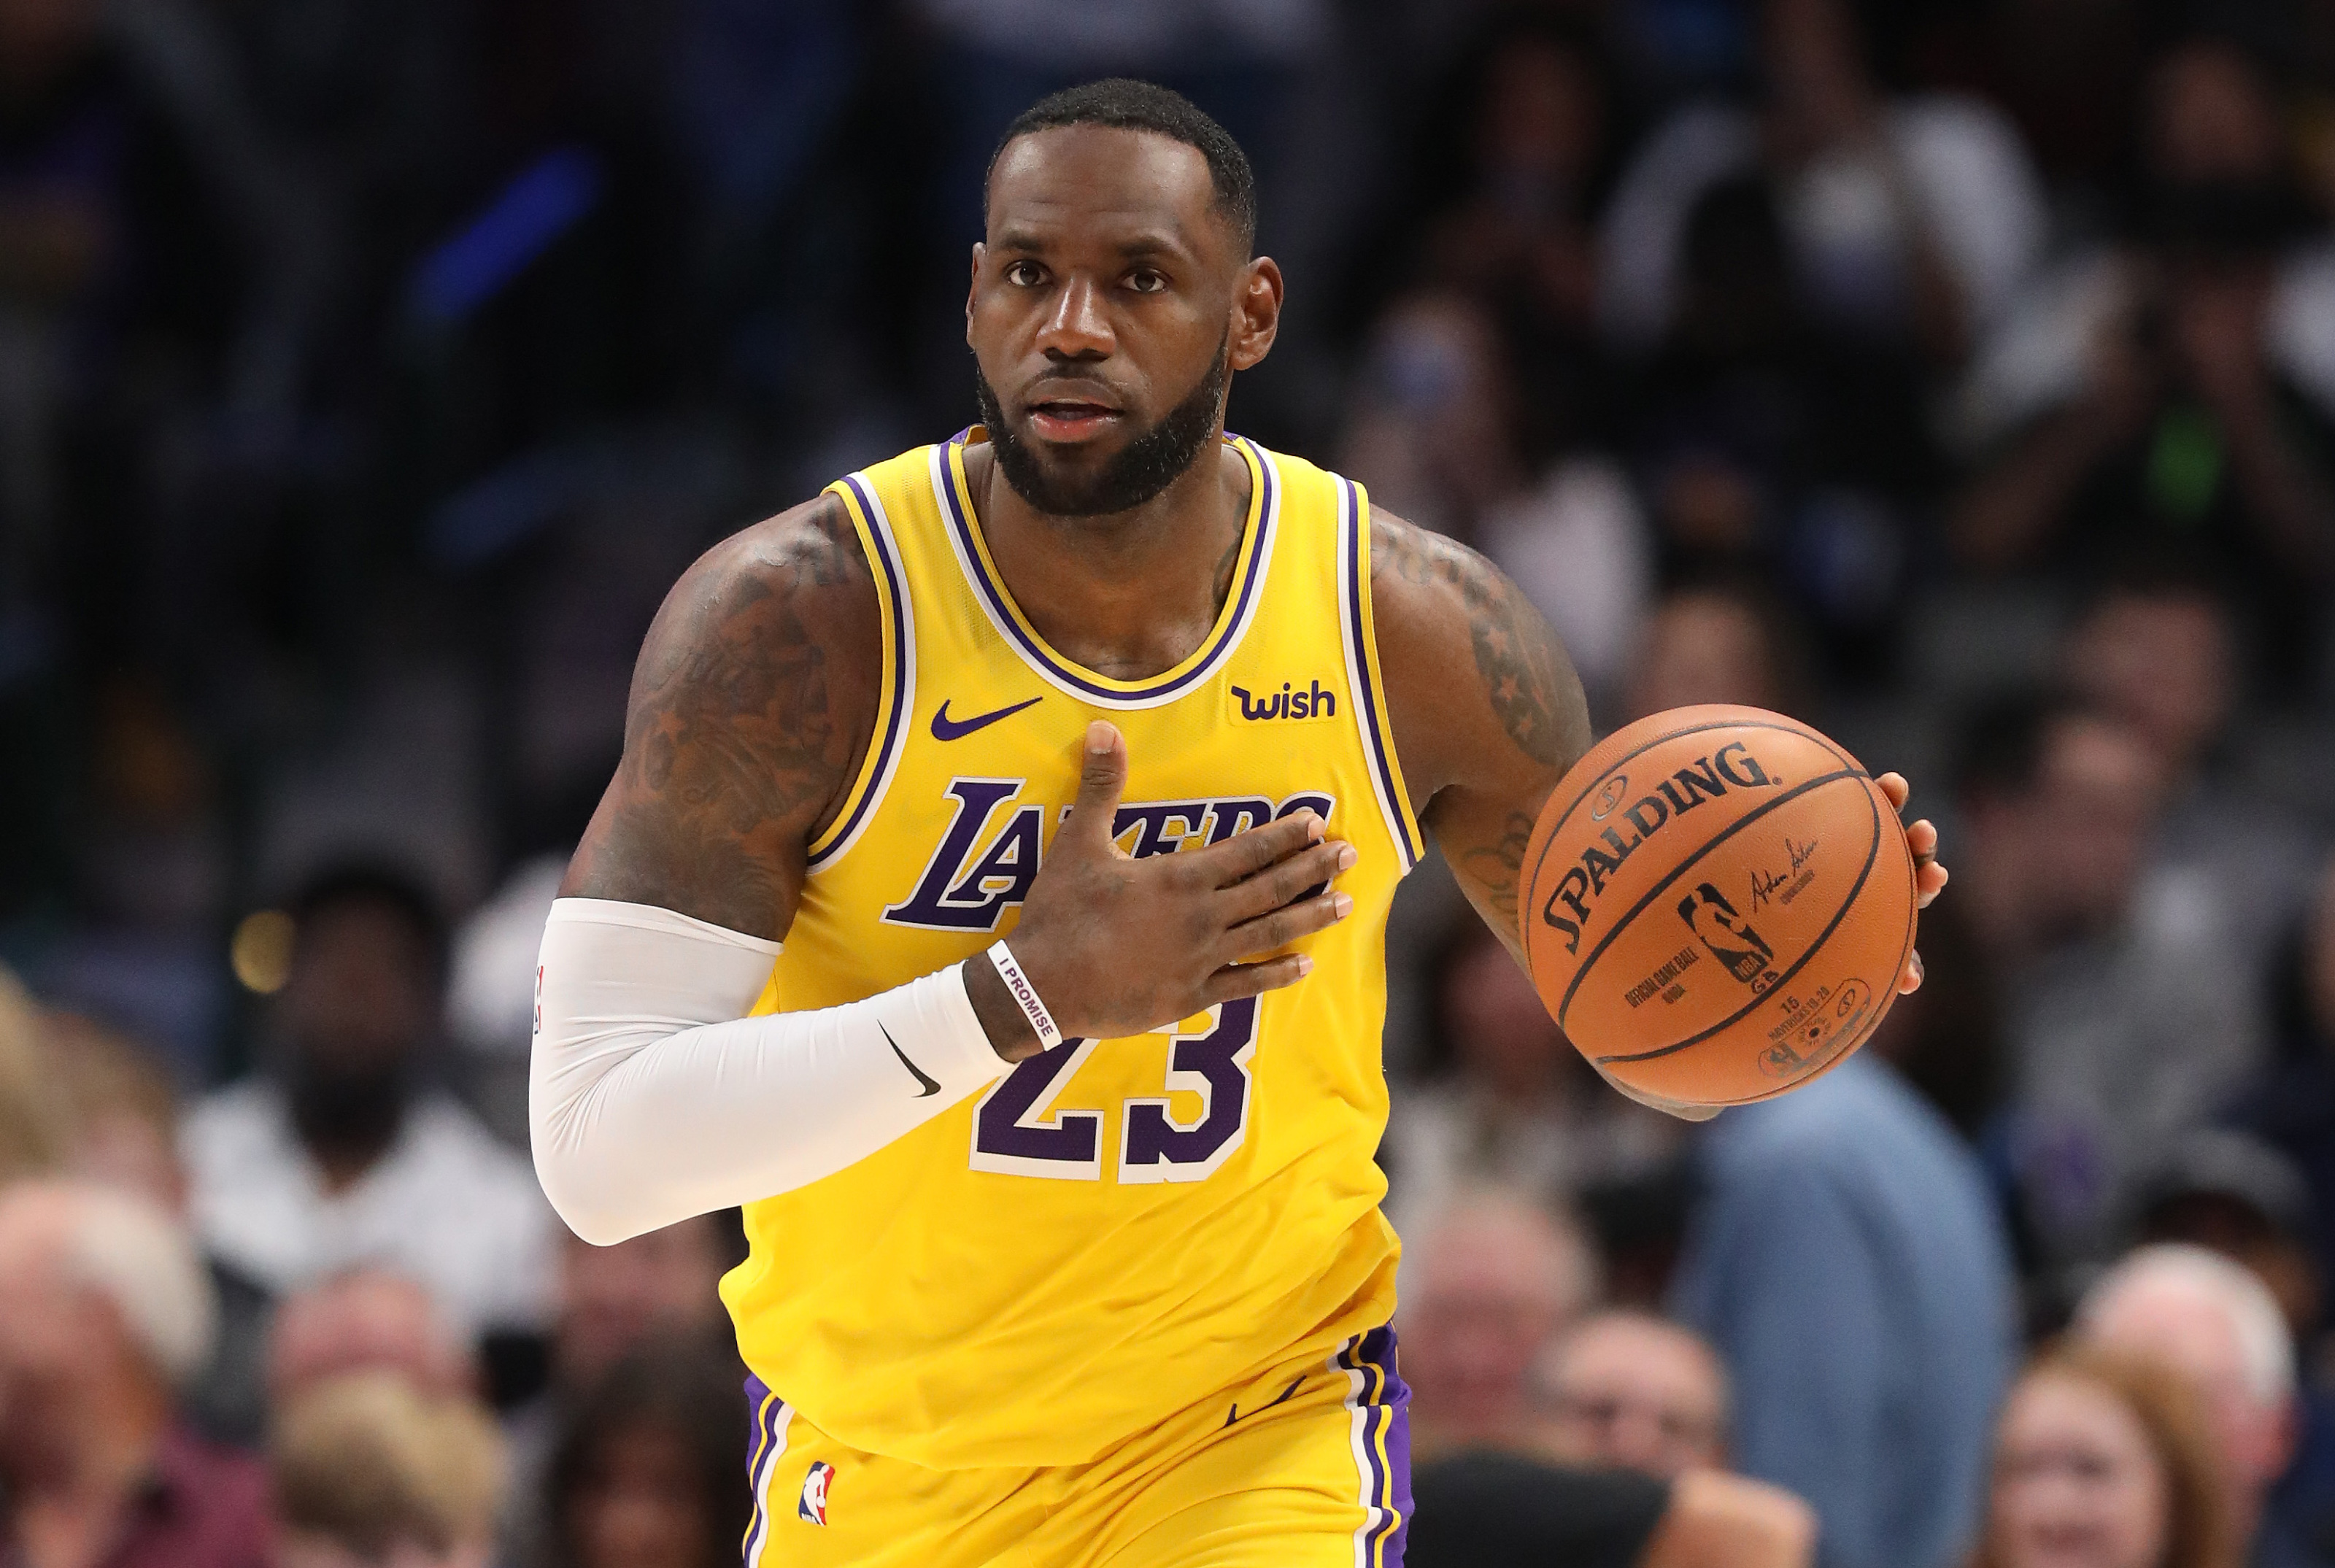 Los Angeles Lakers: LeBron leading the NBA in assists is impressive